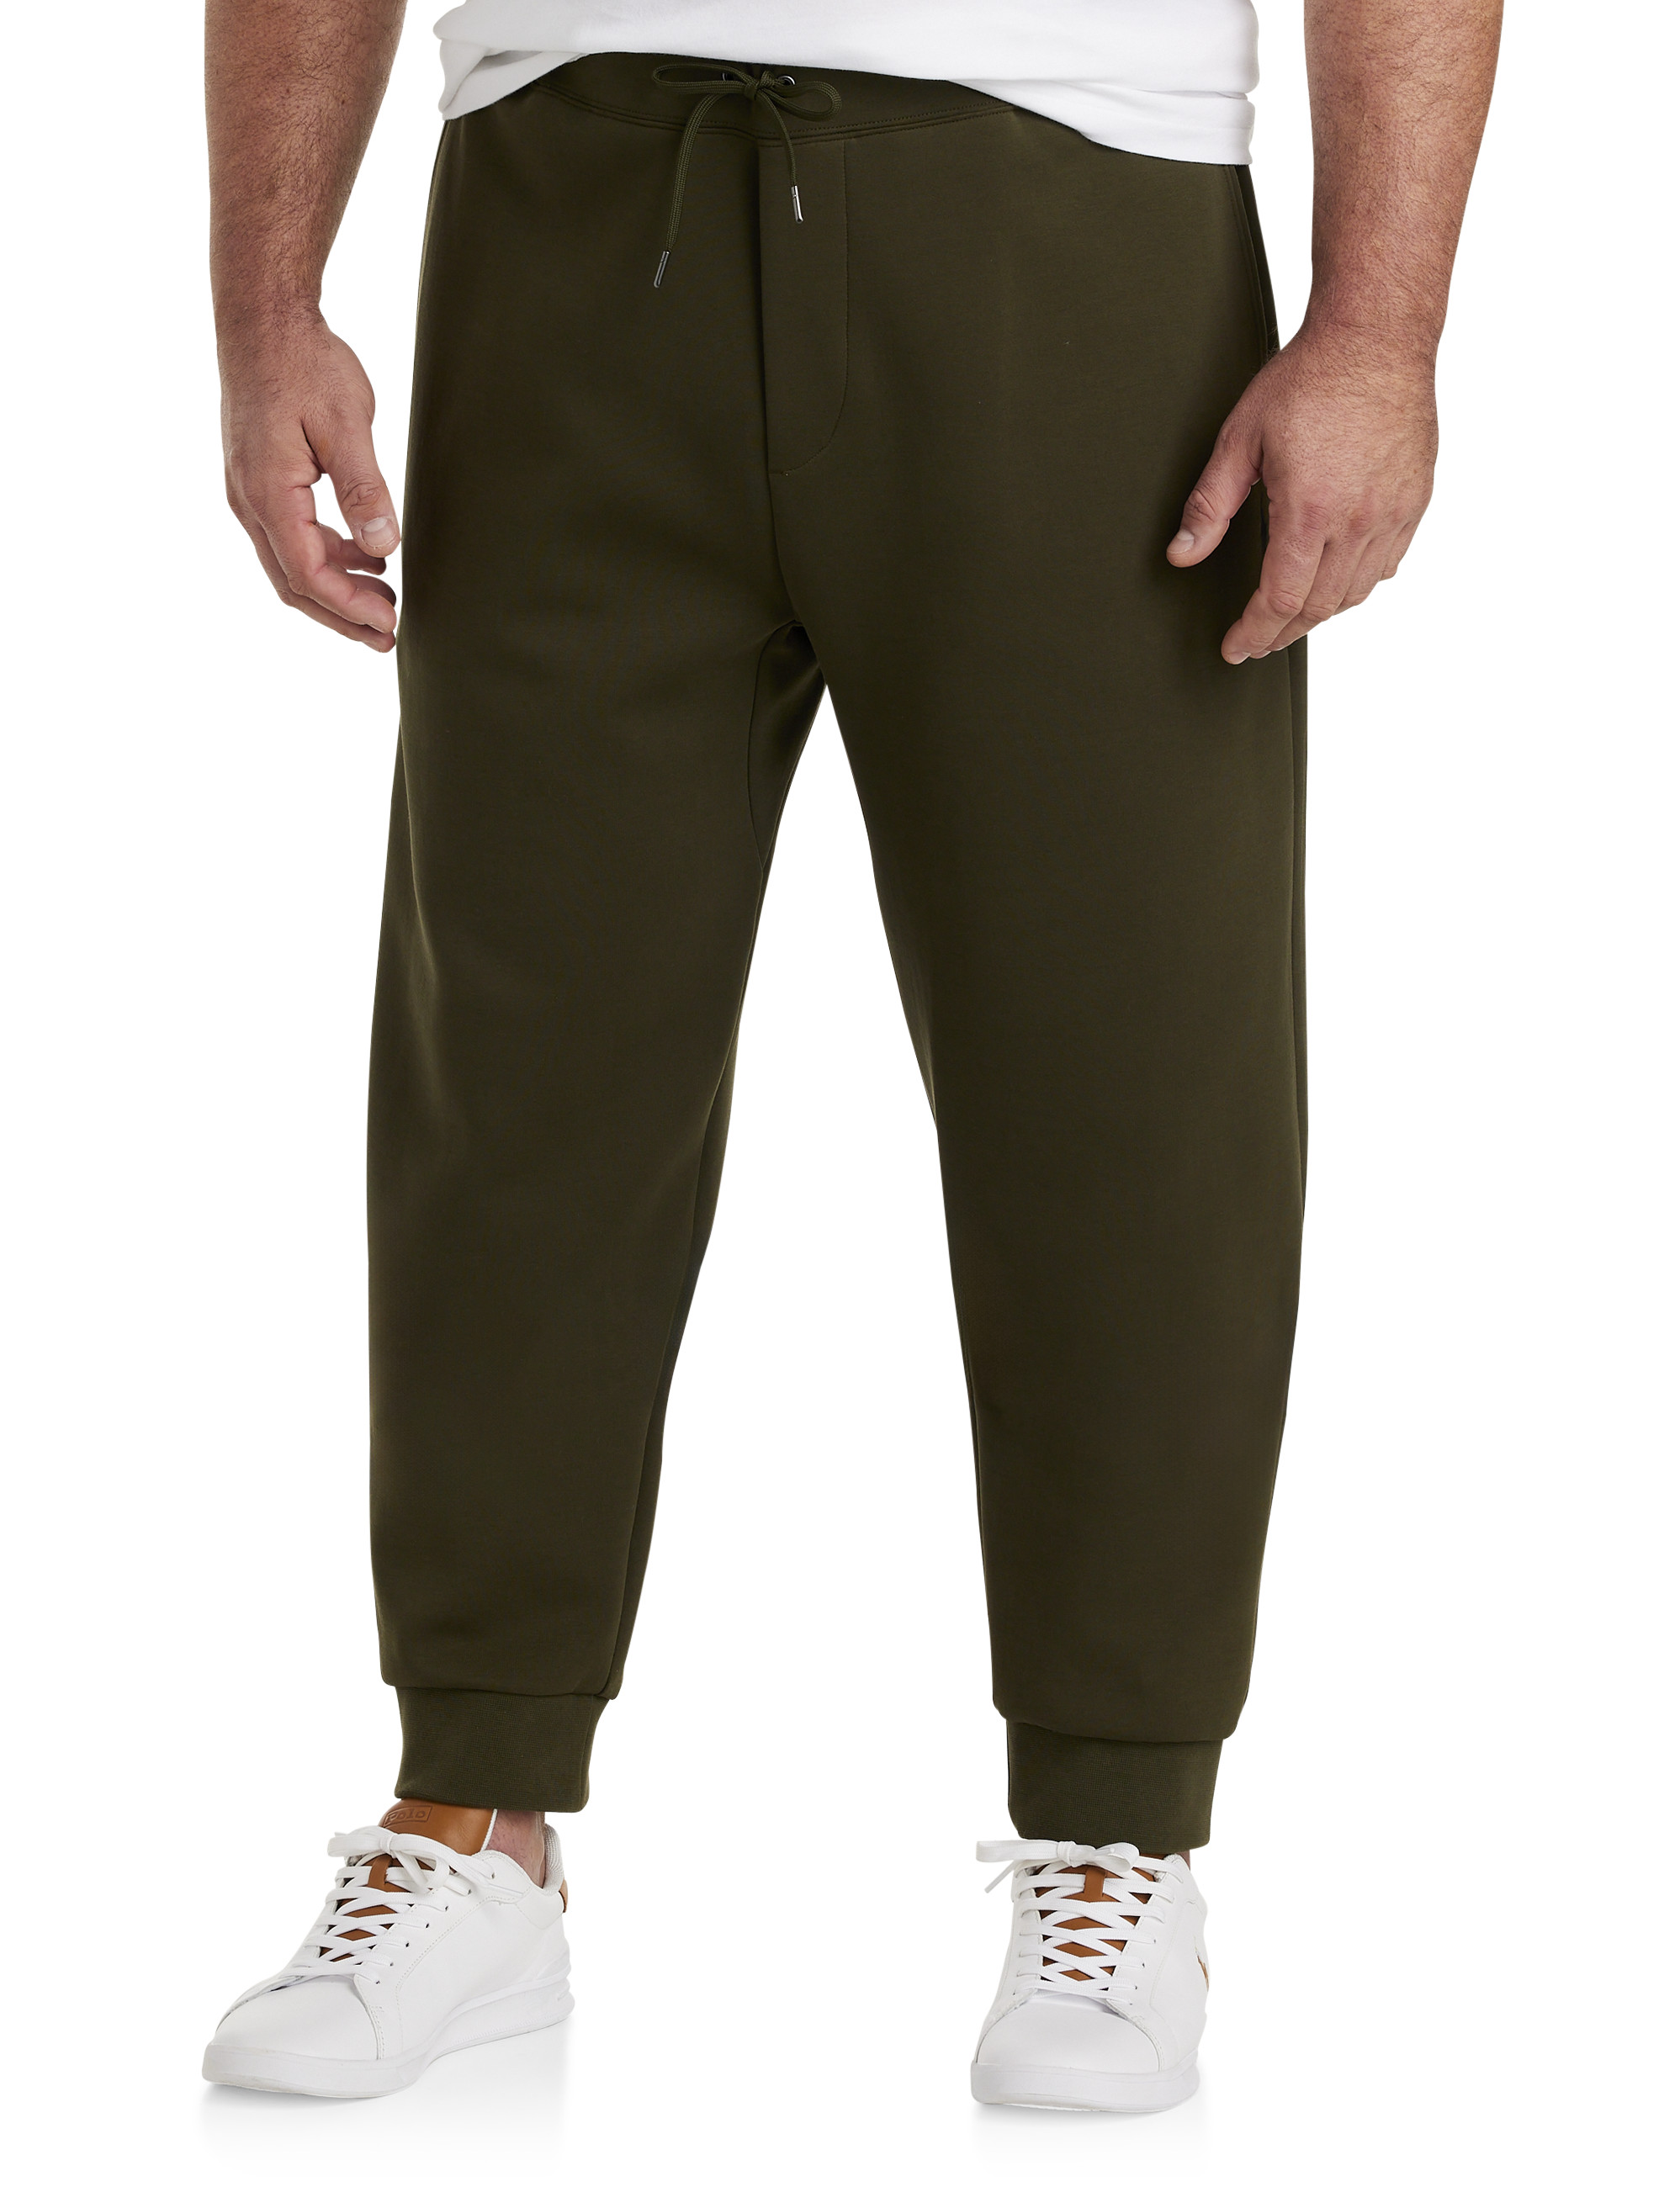 Express Men, Solid Knit Joggers in Olive Green